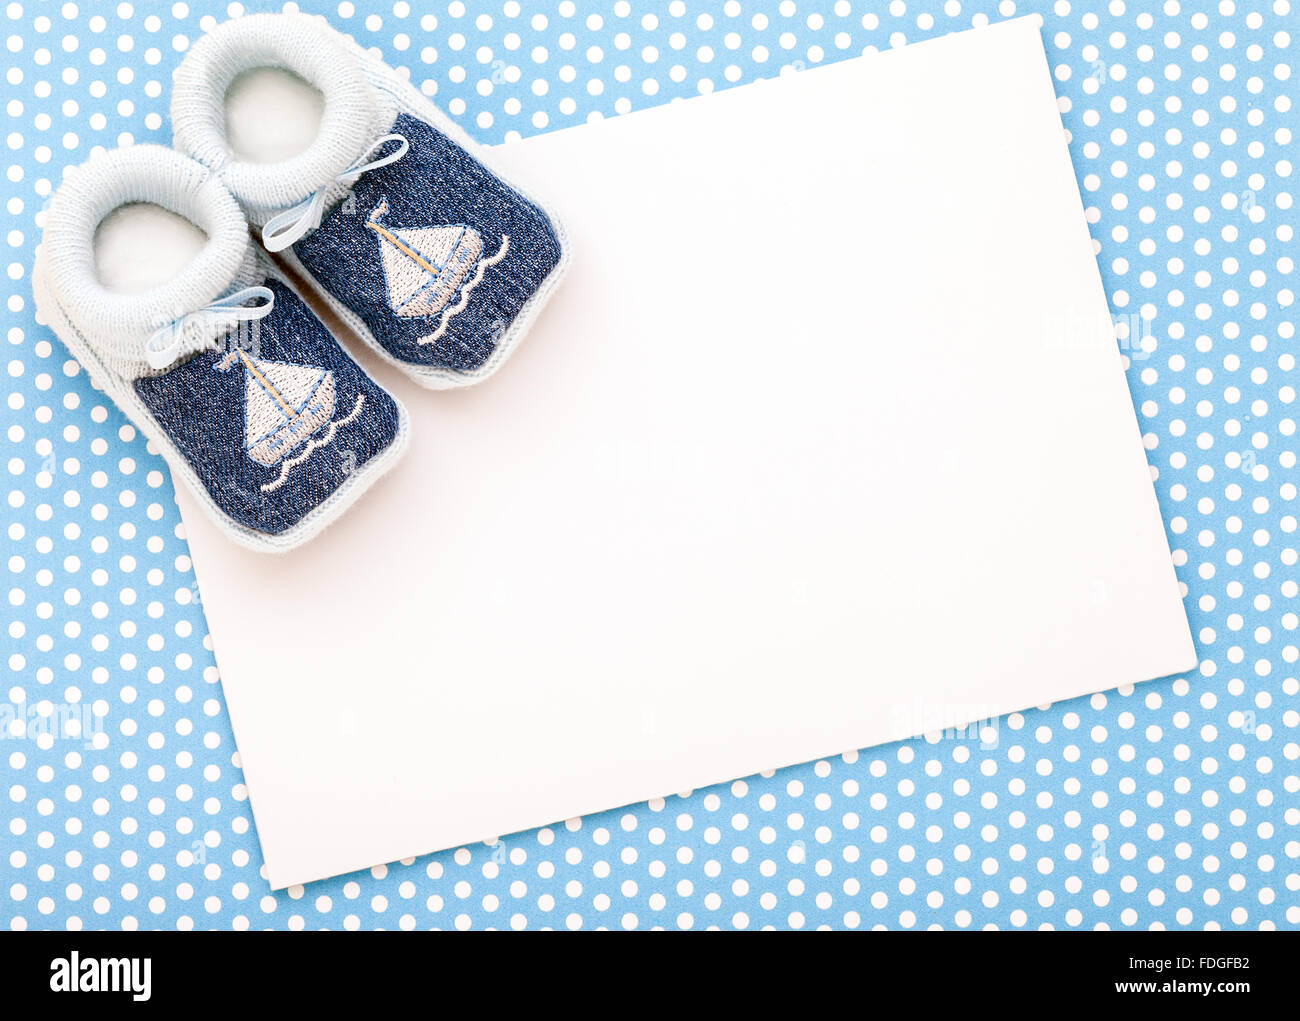 Announcement invitation card with baby shoes on polka dot background. Stock Photo